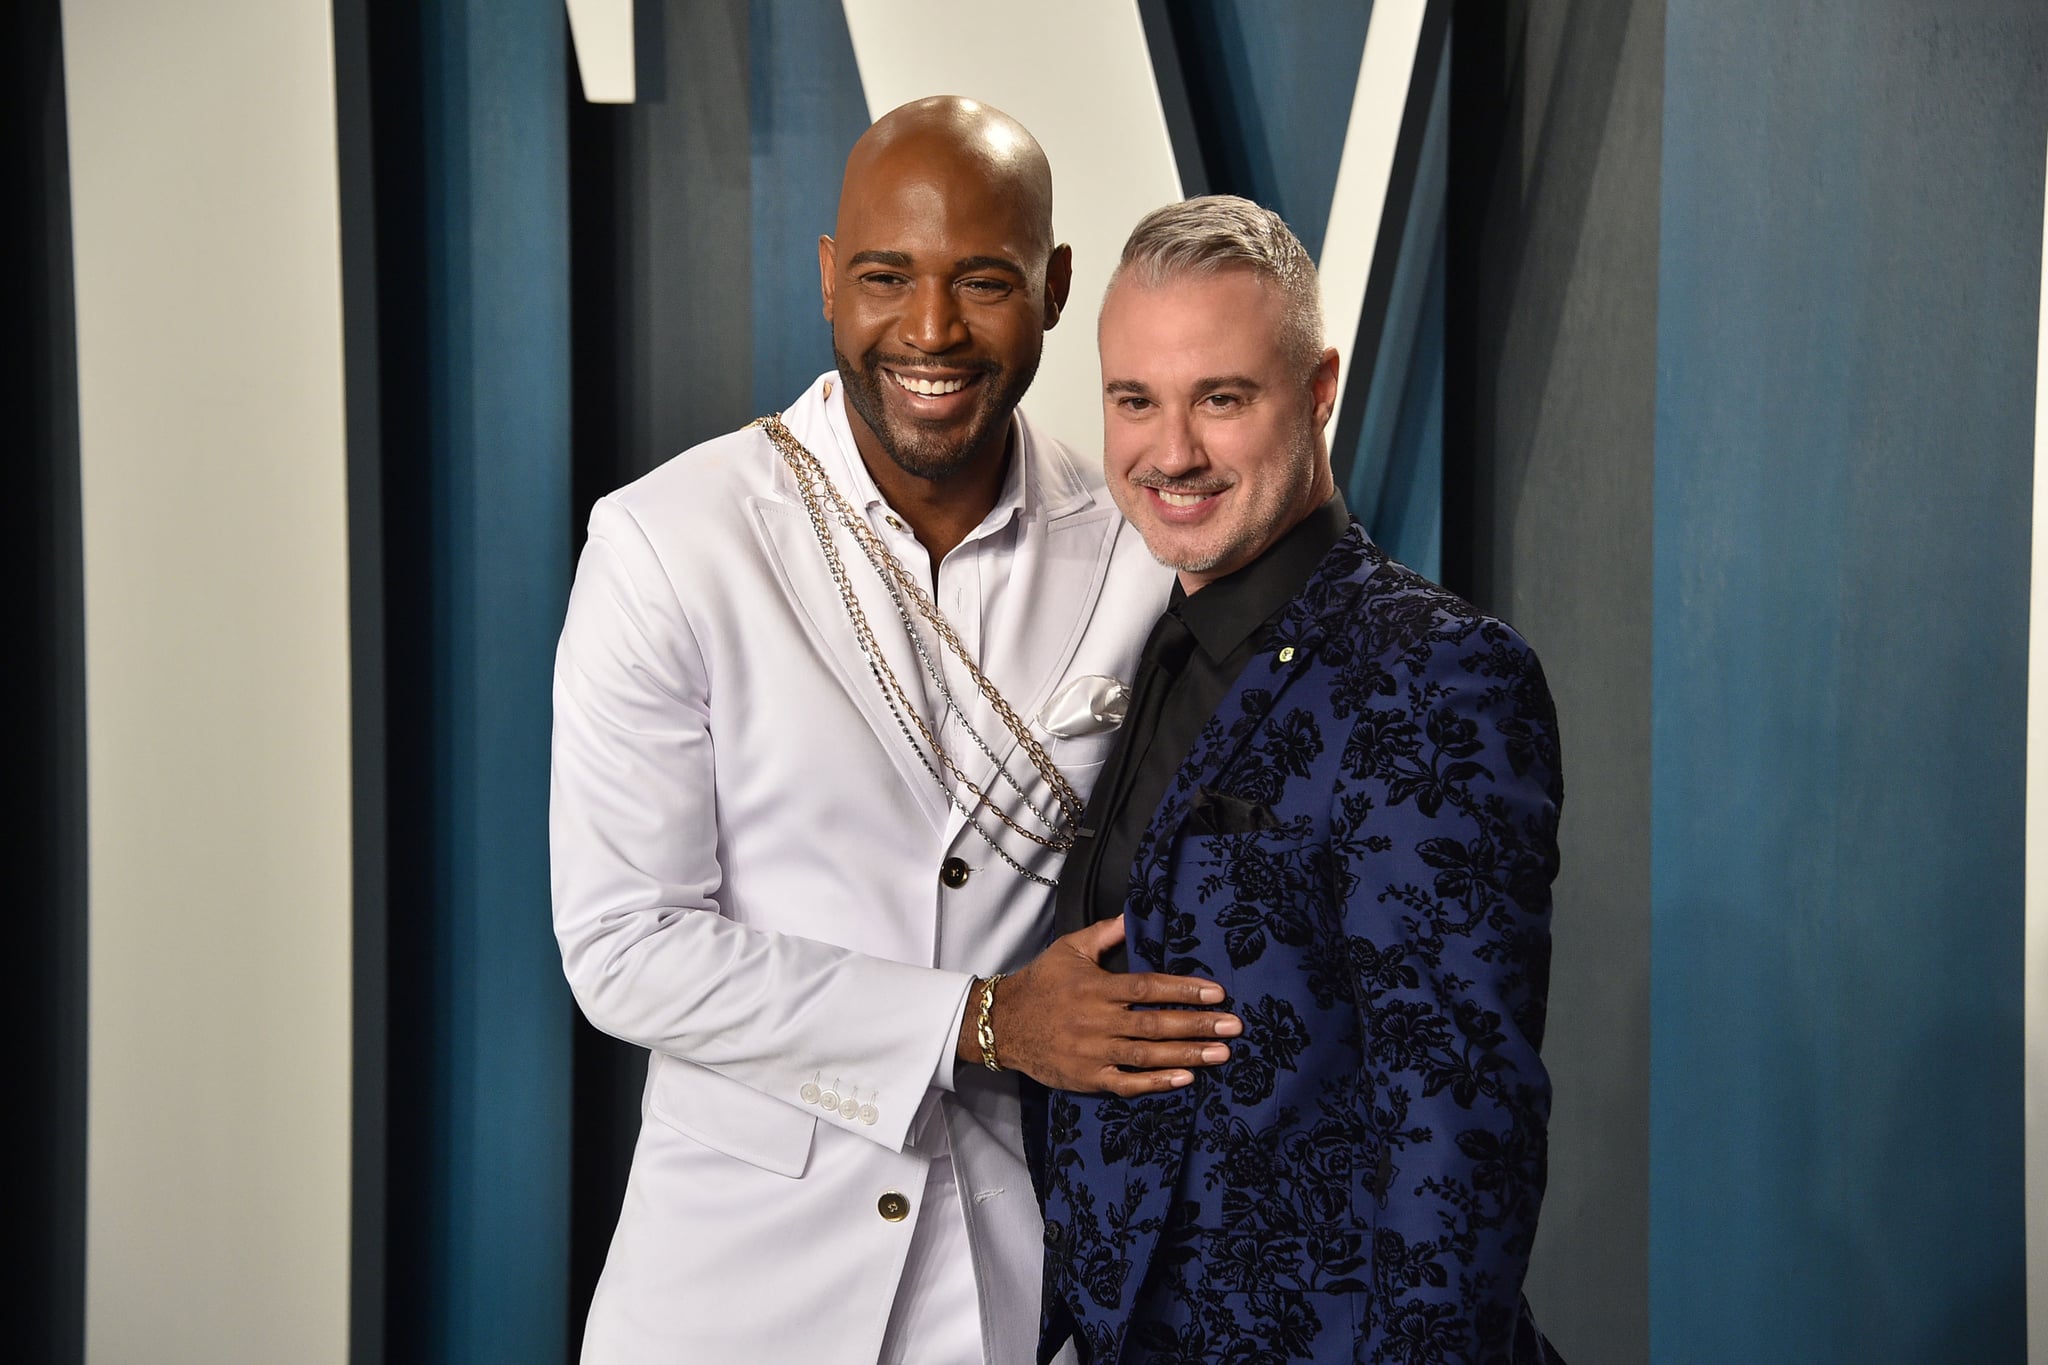 BEVERLY HILLS, CALIFORNIA - FEBRUARY 09: Karamo Brown and Ian Jordan attend the 2020 Vanity Fair Oscar Party at Wallis Annenberg Center for the Performing Arts on February 09, 2020 in Beverly Hills, California. (Photo by David Crotty/Patrick McMullan via Getty Images)